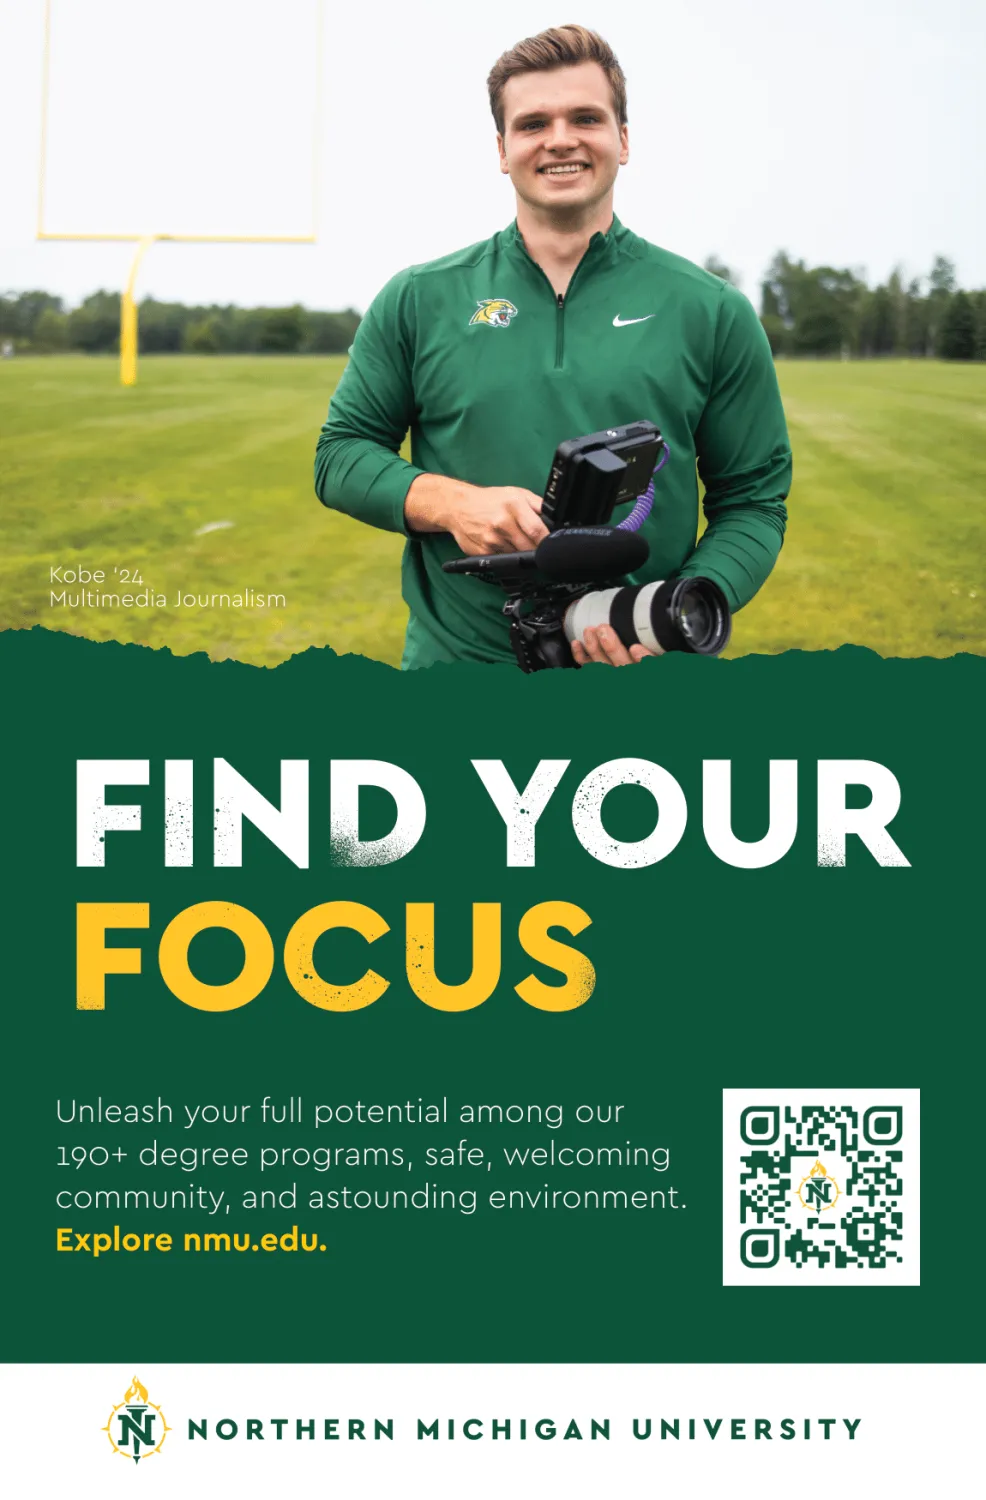 Find Your Focus print advertisement male student with video camera